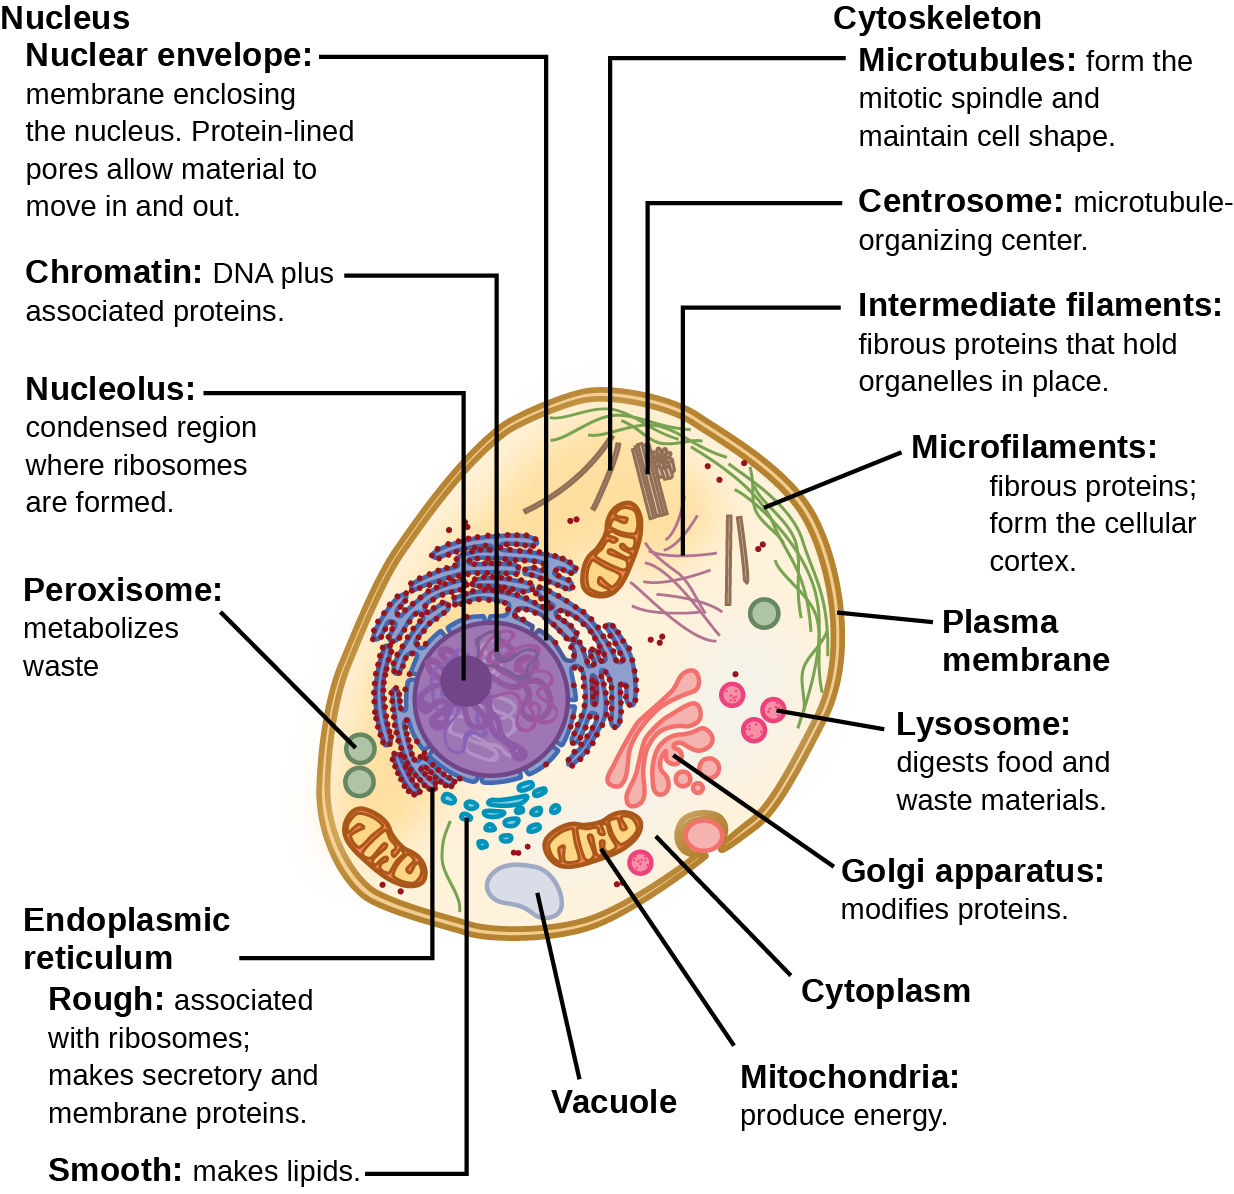 Part a: This illustration shows a typical eukaryotic animal cell, which is egg shaped. The fluid inside the cell is called the cytoplasm, and the cell is surrounded by a cell membrane. The nucleus takes up about one-half the width of the cell. Inside the nucleus is the chromatin, which is composed of DNA and associated proteins. A region of the chromatin is condensed into the nucleolus, a structure where ribosomes are synthesized. The nucleus is encased in a nuclear envelope, which is perforated by protein-lined pores that allow entry of material into the nucleus. The nucleus is surrounded by the rough and smooth endoplasmic reticulum, or ER. The smooth ER is the site of lipid synthesis. The rough ER has embedded ribosomes that give it a bumpy appearance. It synthesizes membrane and secretory proteins. In addition to the ER, many other organelles float inside the cytoplasm. These include the Golgi apparatus, which modifies proteins and lipids synthesized in the ER. The Golgi apparatus is made of layers of flat membranes. Mitochondria, which produce food for the cell, have an outer membrane and a highly folded inner membrane. Other, smaller organelles include peroxisomes that metabolize waste, lysosomes that digest food, and vacuoles. Ribosomes, responsible for protein synthesis, also float freely in the cytoplasm and are depicted as small dots. The last cellular component shown is the cytoskeleton, which has four different types of components: microfilaments, intermediate filaments, microtubules, and centrosomes. Microfilaments are fibrous proteins that line the cell membrane and make up the cellular cortex. Intermediate filaments are fibrous proteins that hold organelles in place. Microtubules form the mitotic spindle and maintain cell shape. Centrosomes are made of two tubular structures at right angles to one another. They form the microtubule-organizing center.